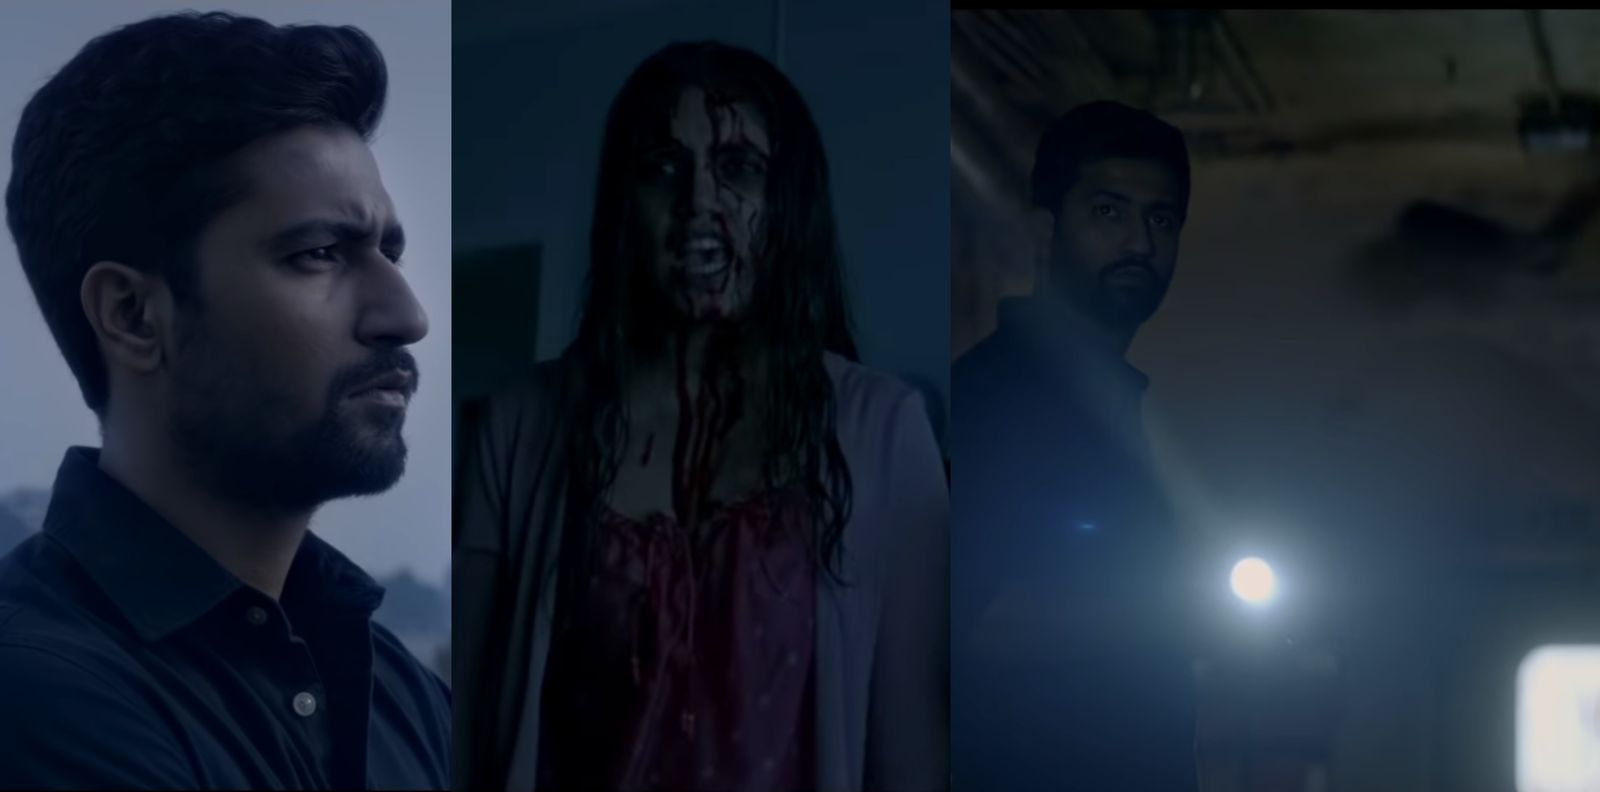 Bhoot: The Haunted Ship - The Trailer Featuring Vicky Kaushal Has All Cliches We Expect In A Horror Film, But Can It Go Beyond?